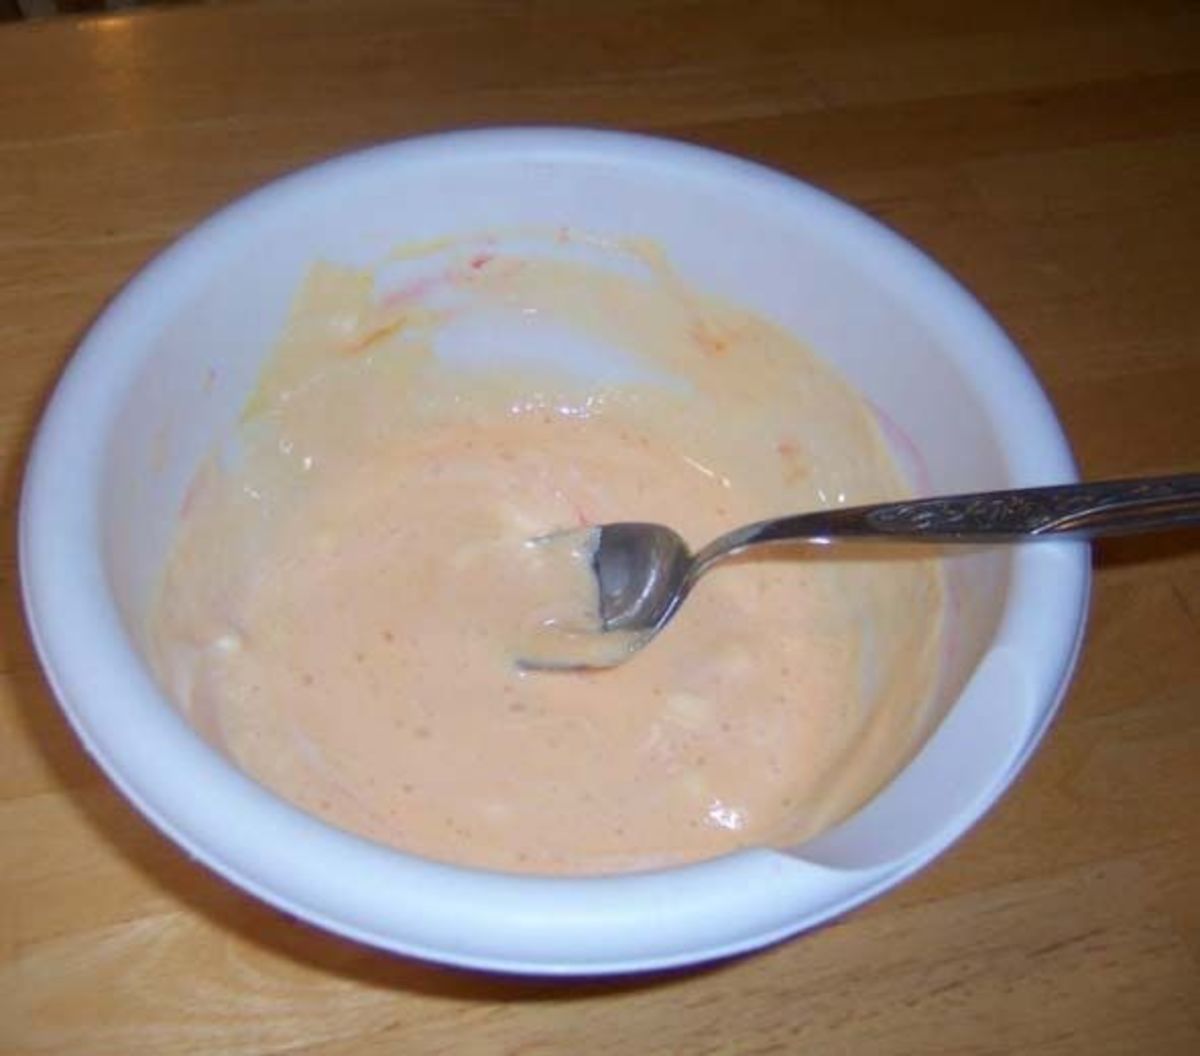 A gooey bowl of melted marshmallows, food dye, water, and cooking oil stirred to a uniform color and consistency